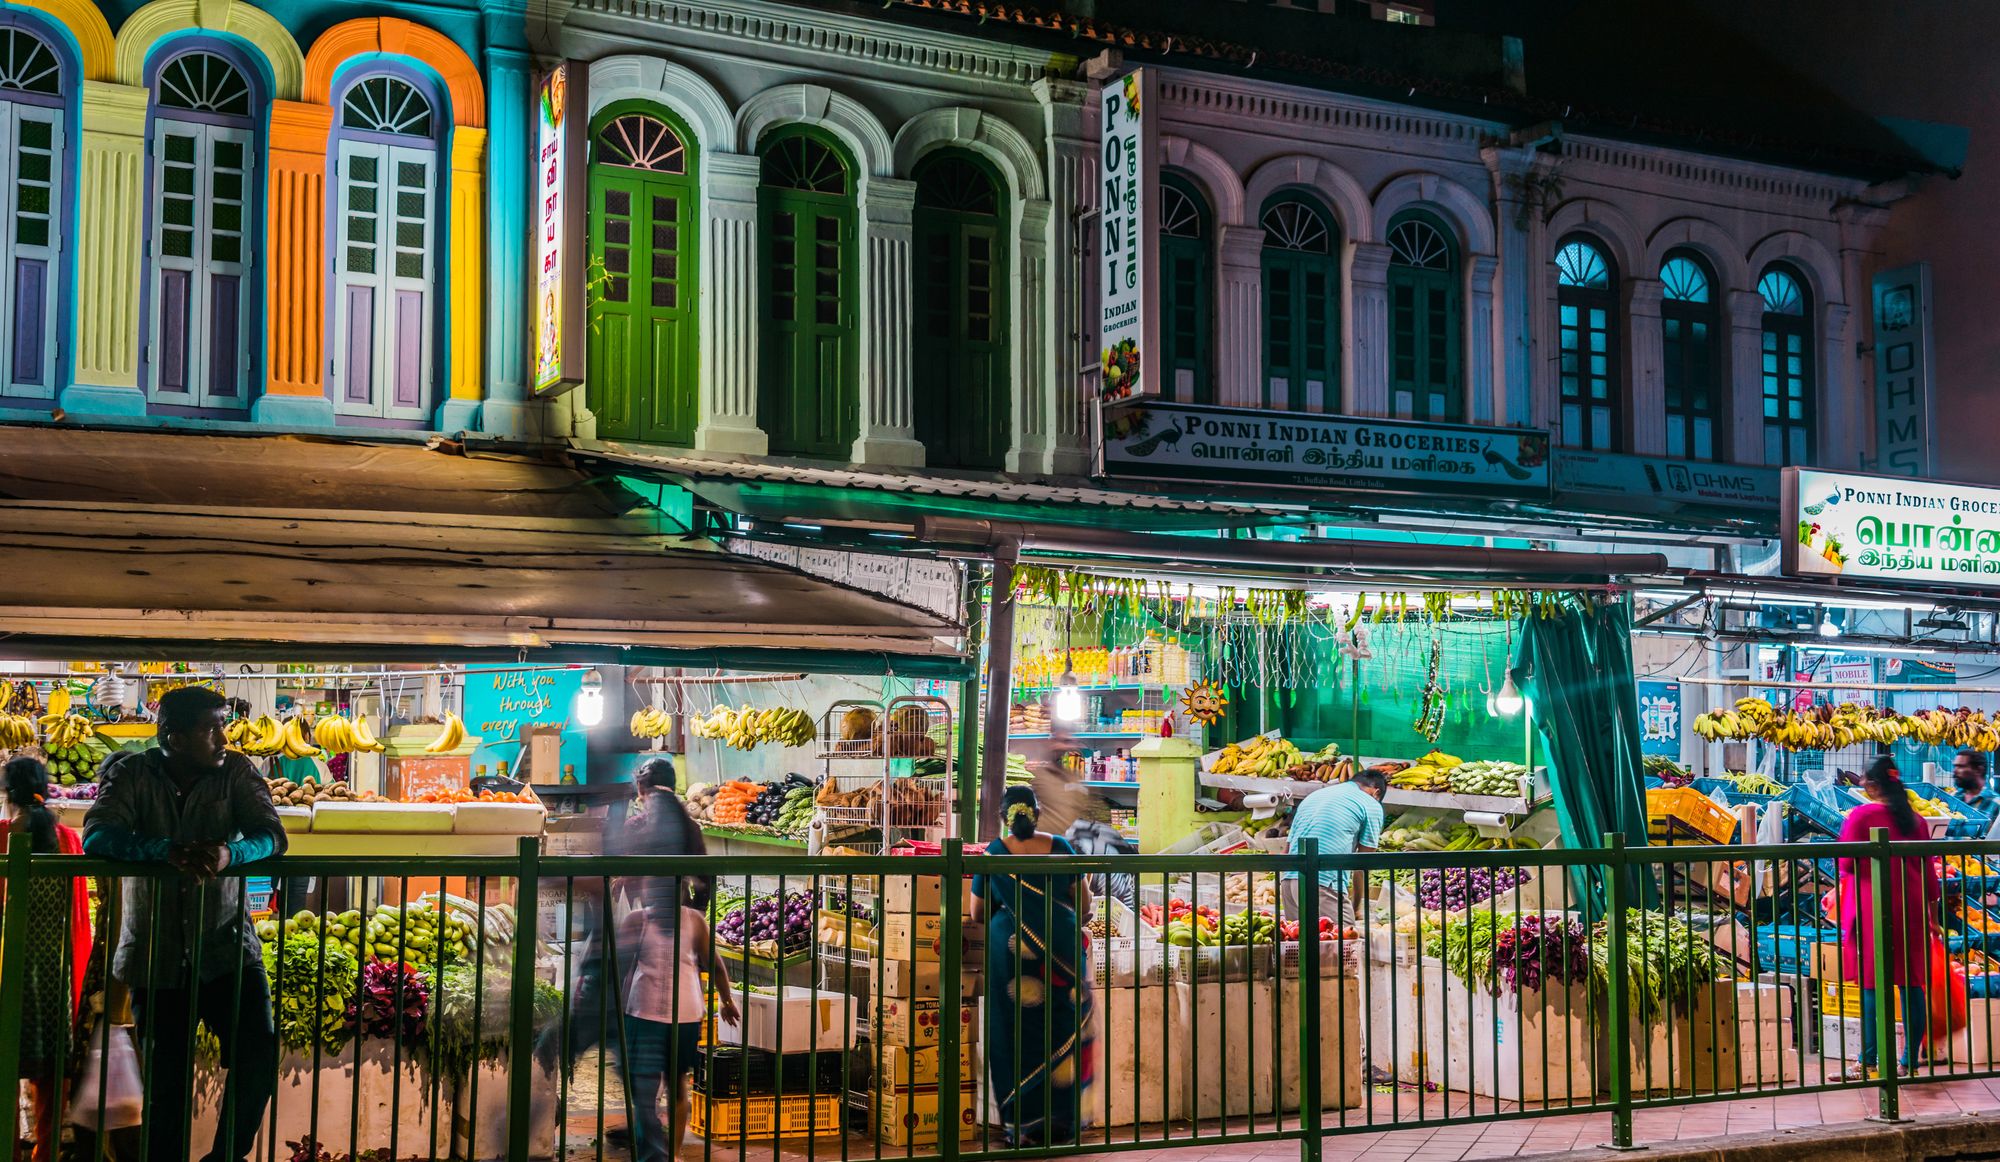 Little India in Singapore at night. Photo: Monticello/Shutterstock